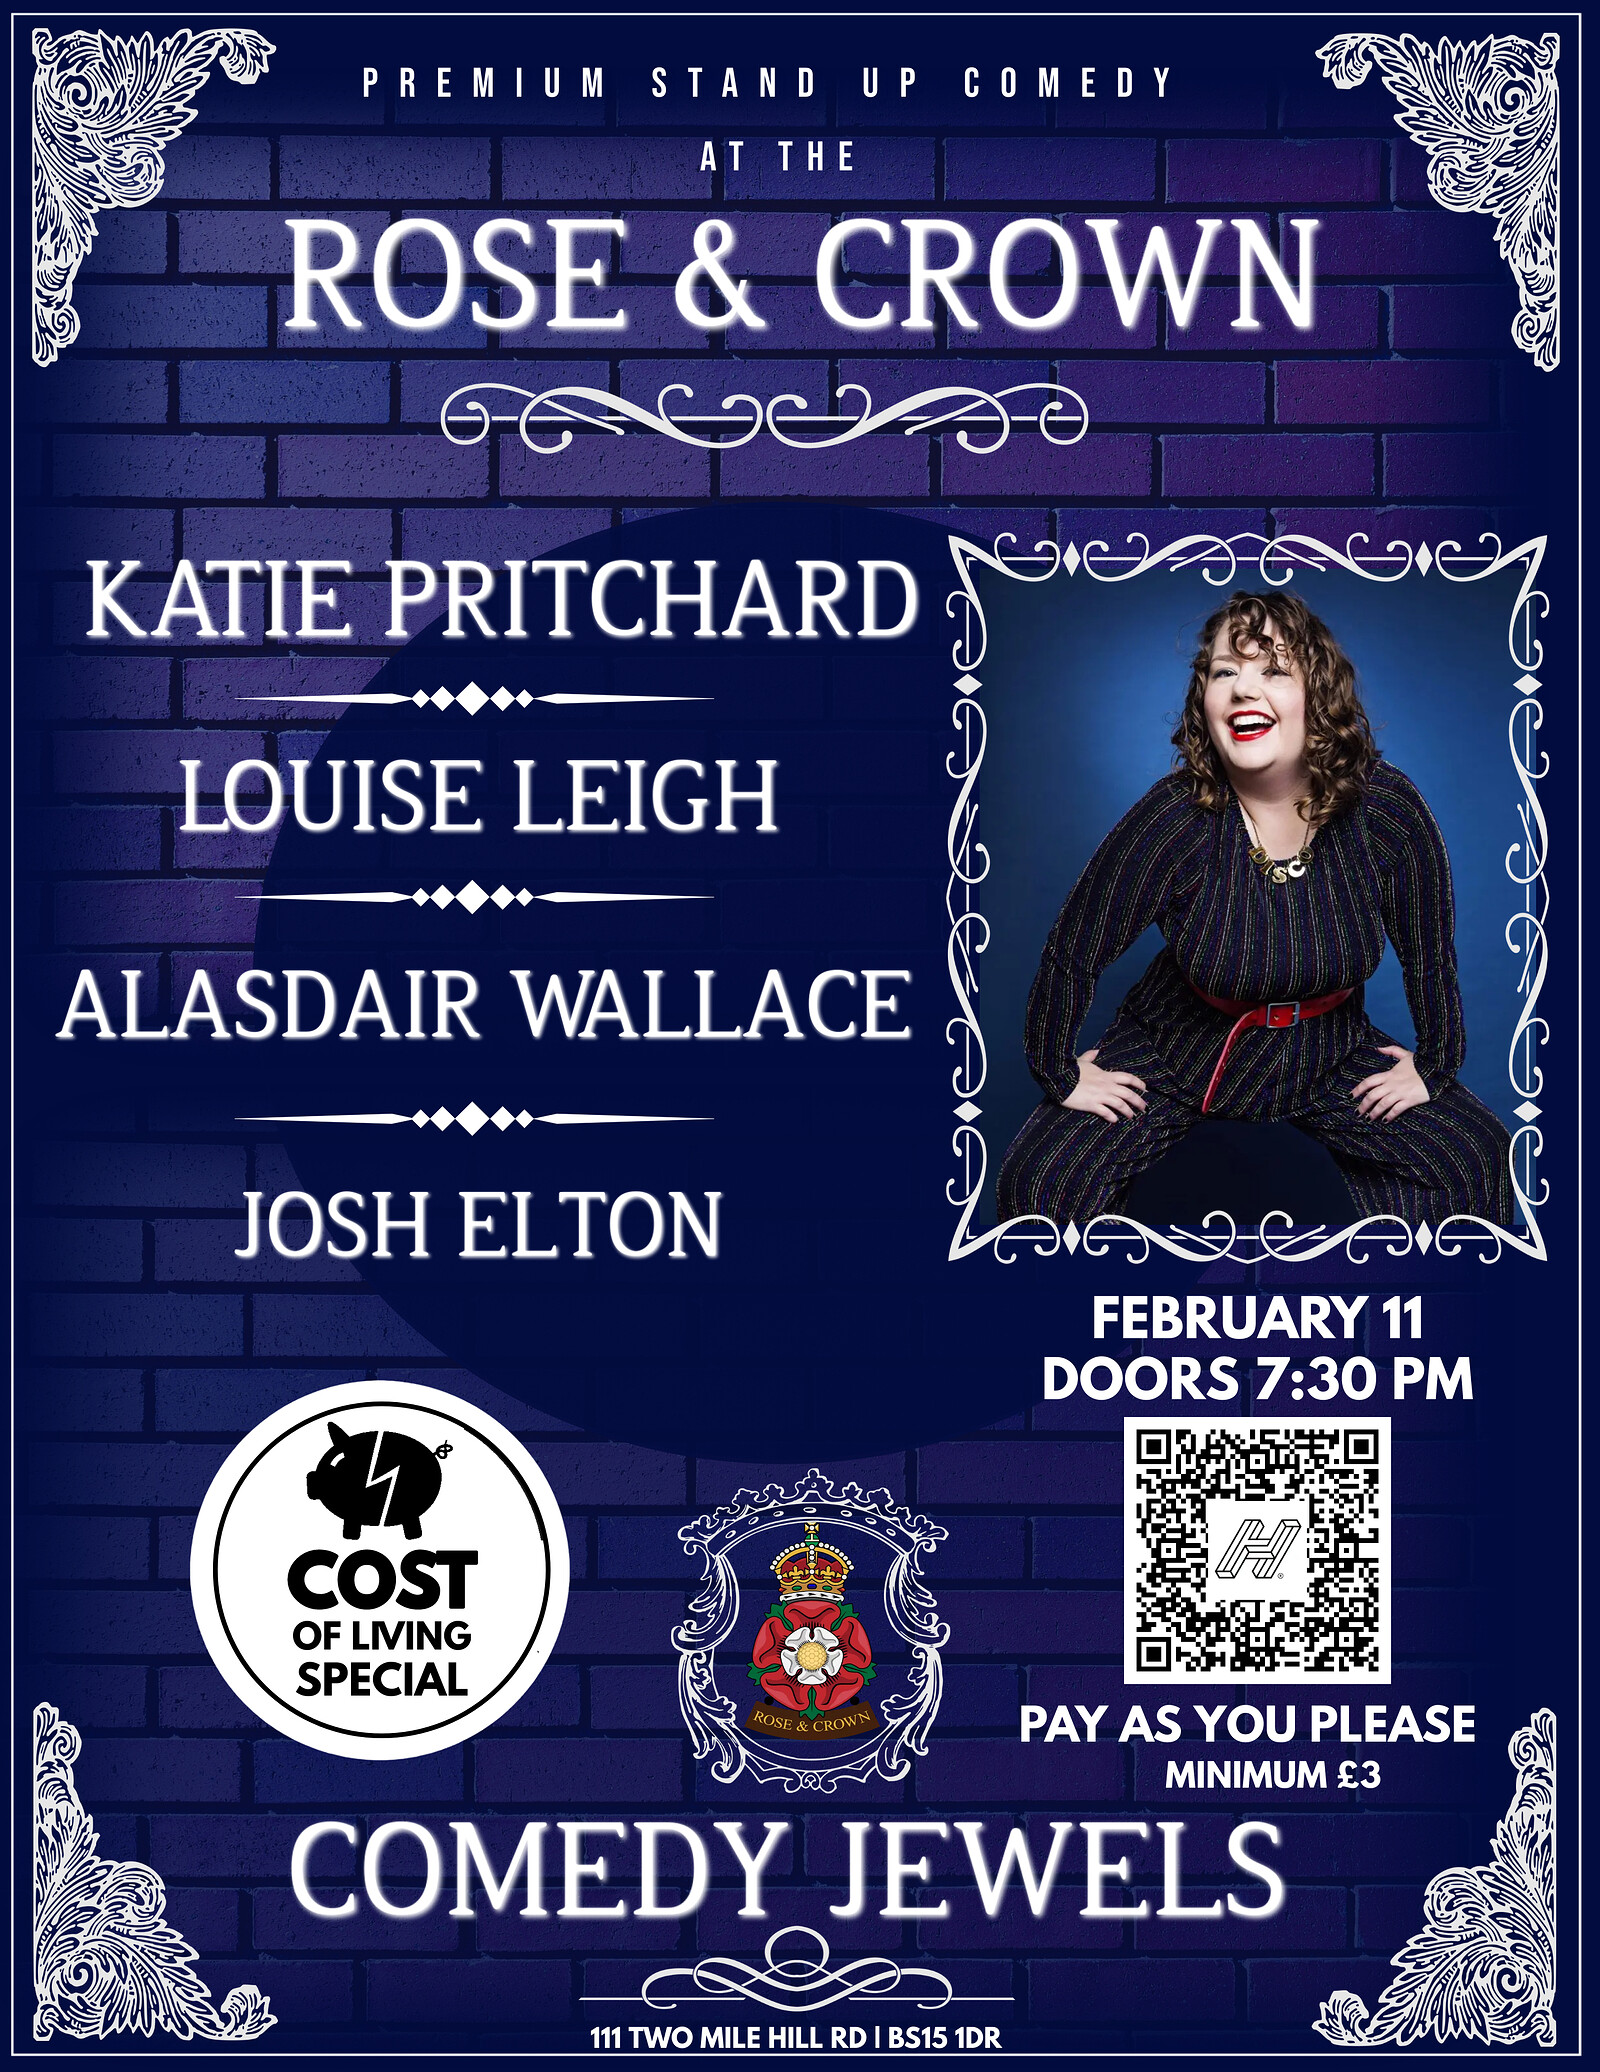 Comedy Jewels at The Rose and Crown